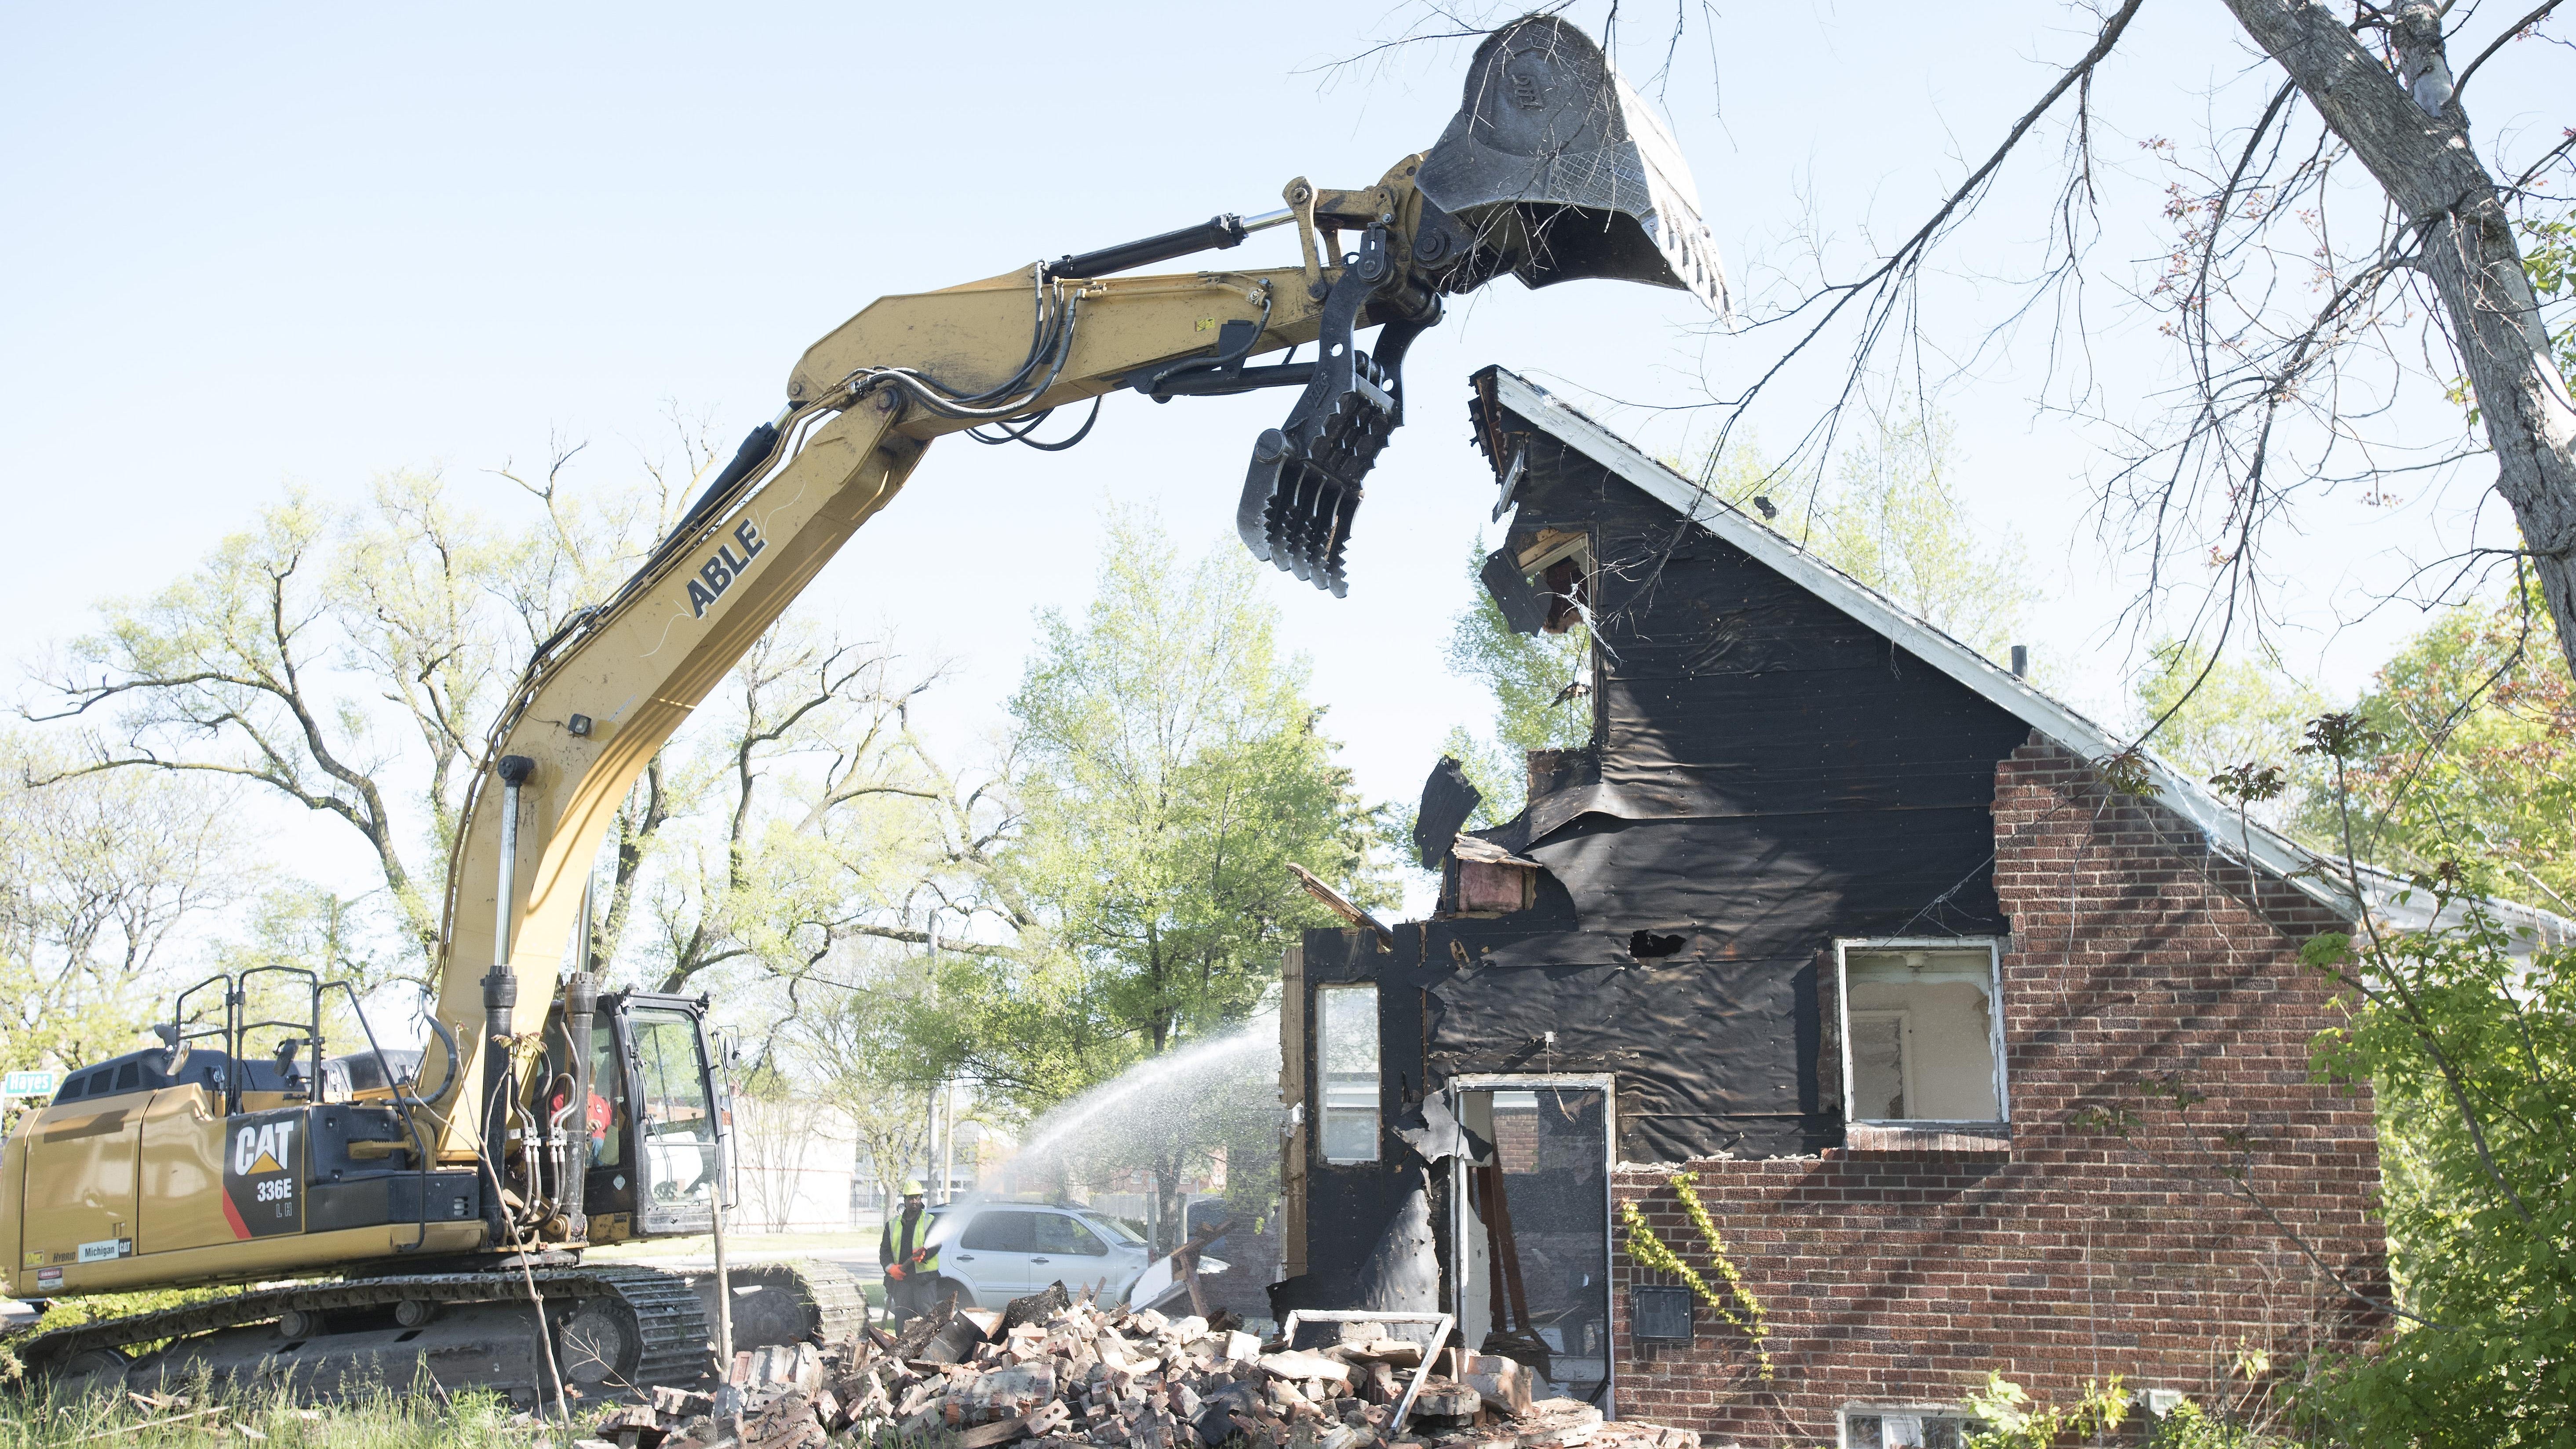 The city's demolition program, a centerpiece of the Duggan administration, came under scrutiny in fall 2015 amid concerns over bidding practices and spiraling costs. It's since been under the scrutiny of state and local probes as well as a federal grand jury.